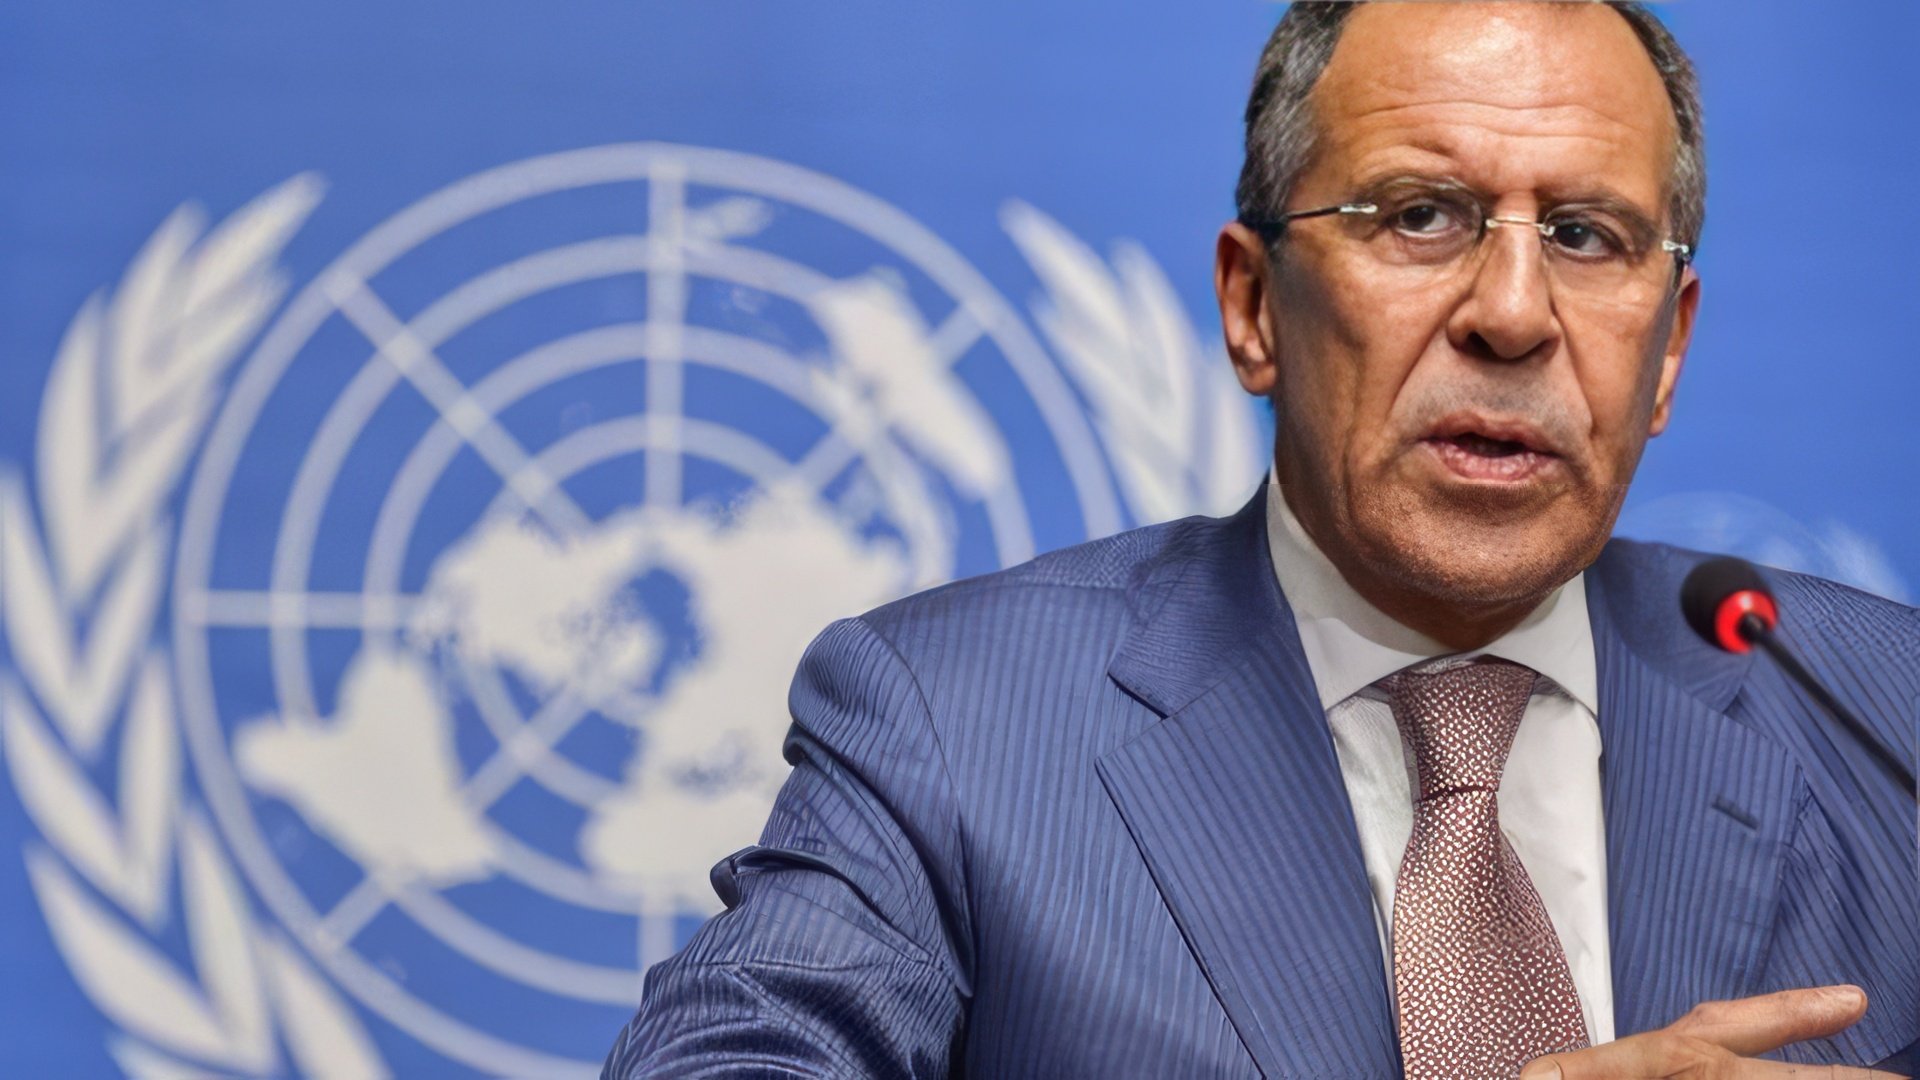 Sergey Lavrov was the RF Permanent Representative to the UN for 10 years